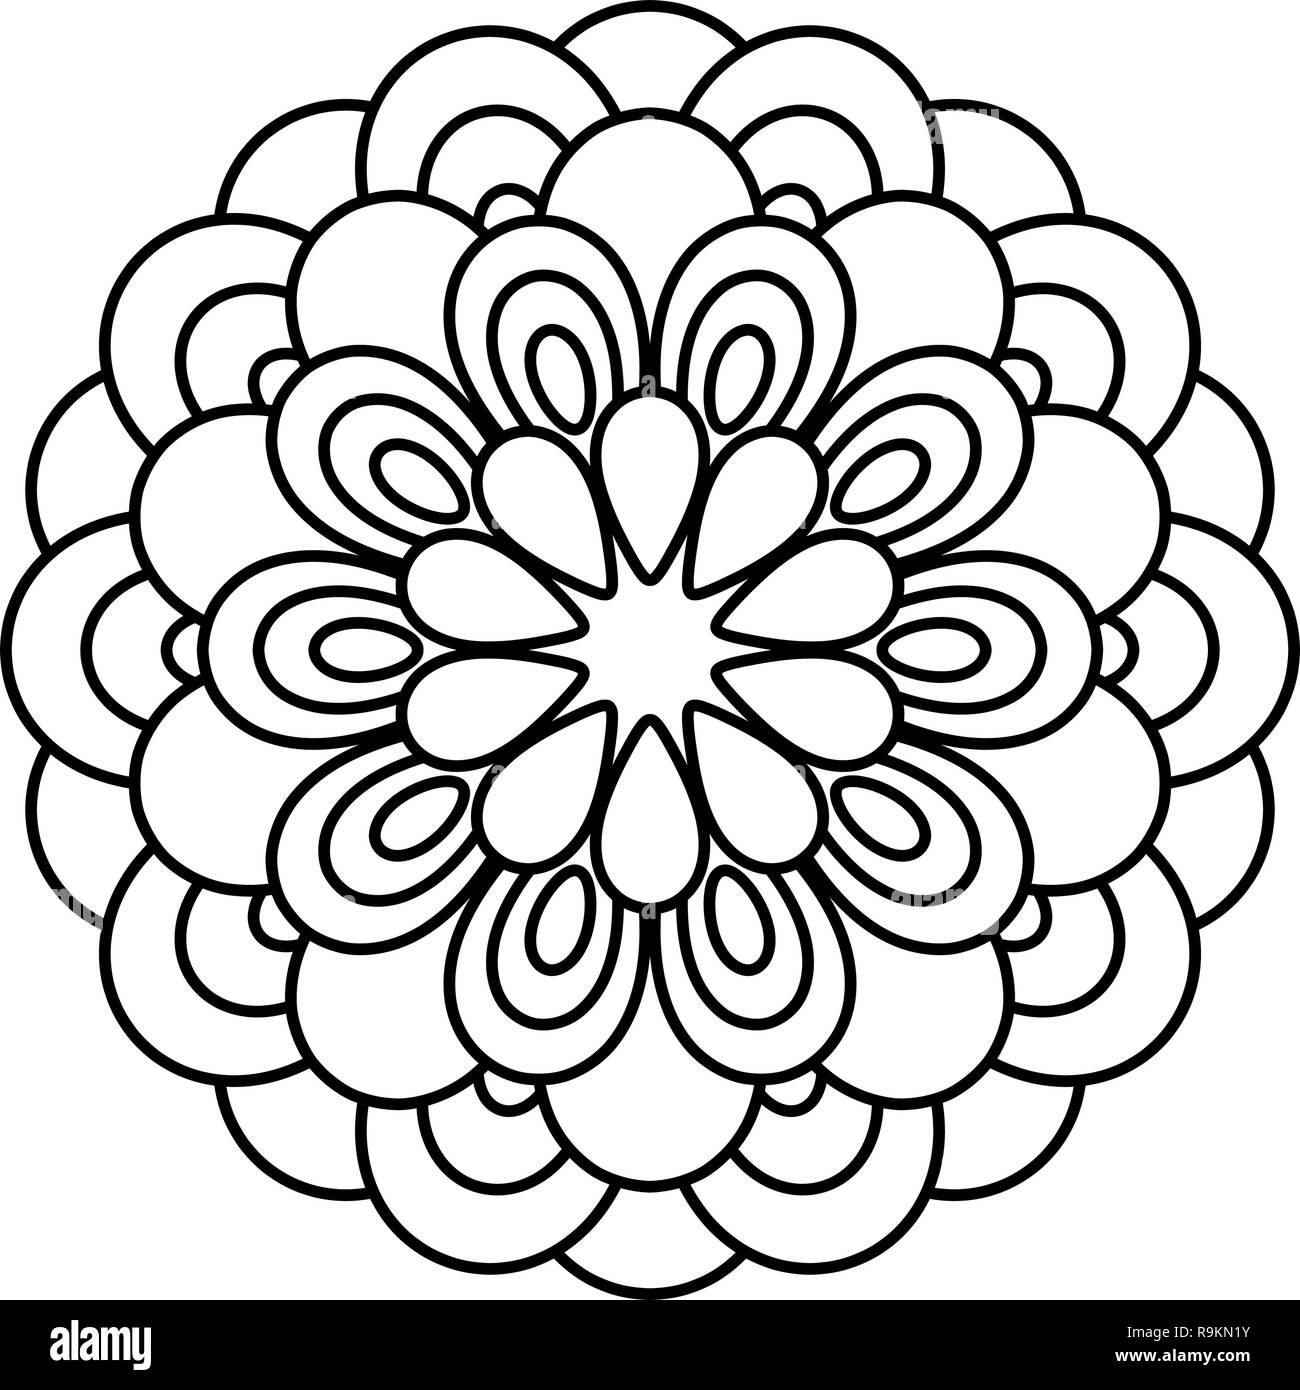 Flower mandala vector illustration adult coloring page circular abstract floral oriental pattern vintage decorative elements isolated on white background stock vector image art